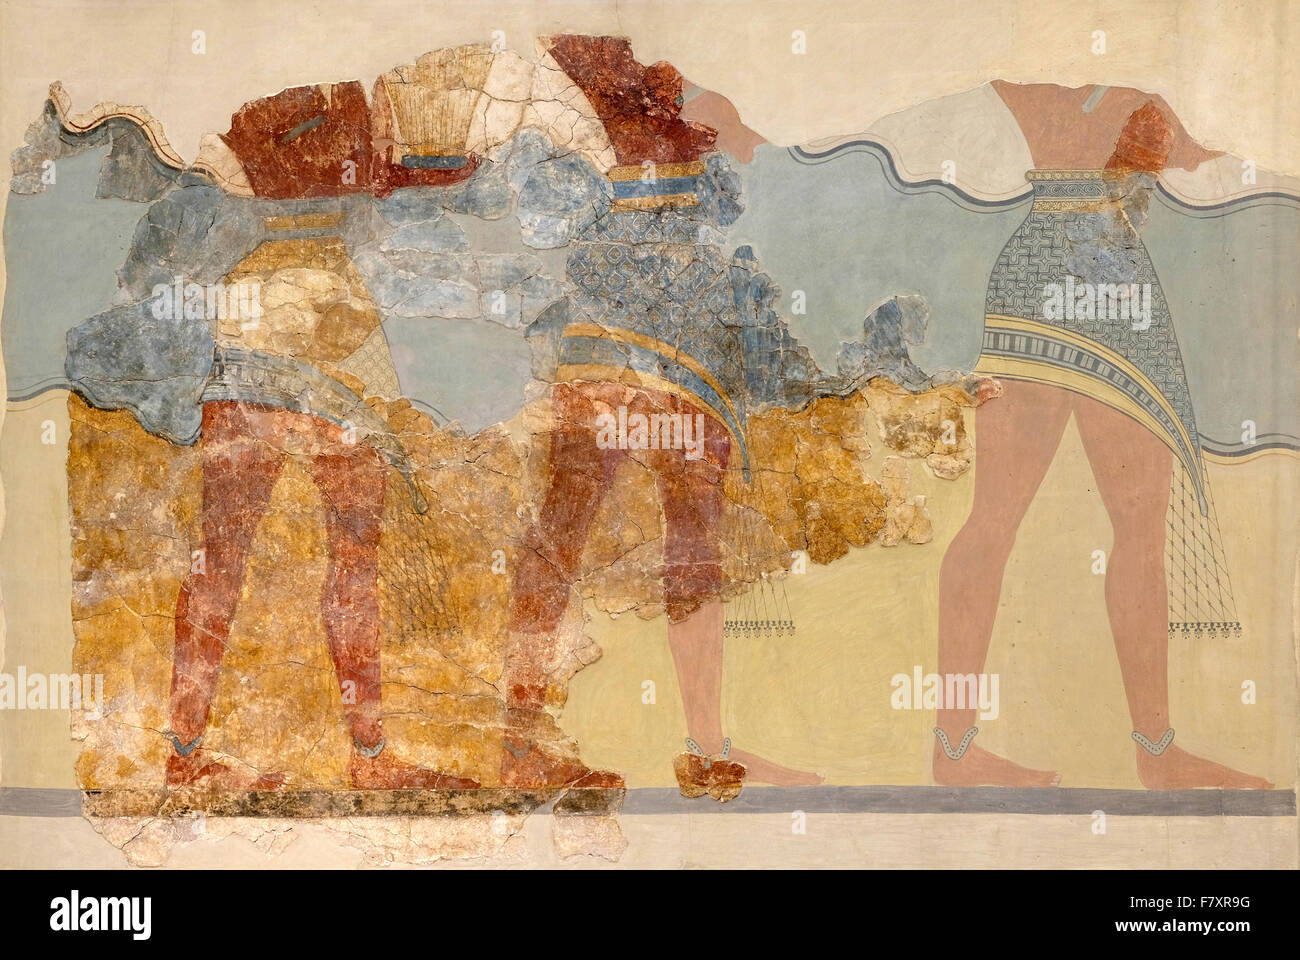 Fragment of the Procession Fresco from the Minoan Palace at Knossos.  Three male figures are shown bearing gifts. Stock Photo